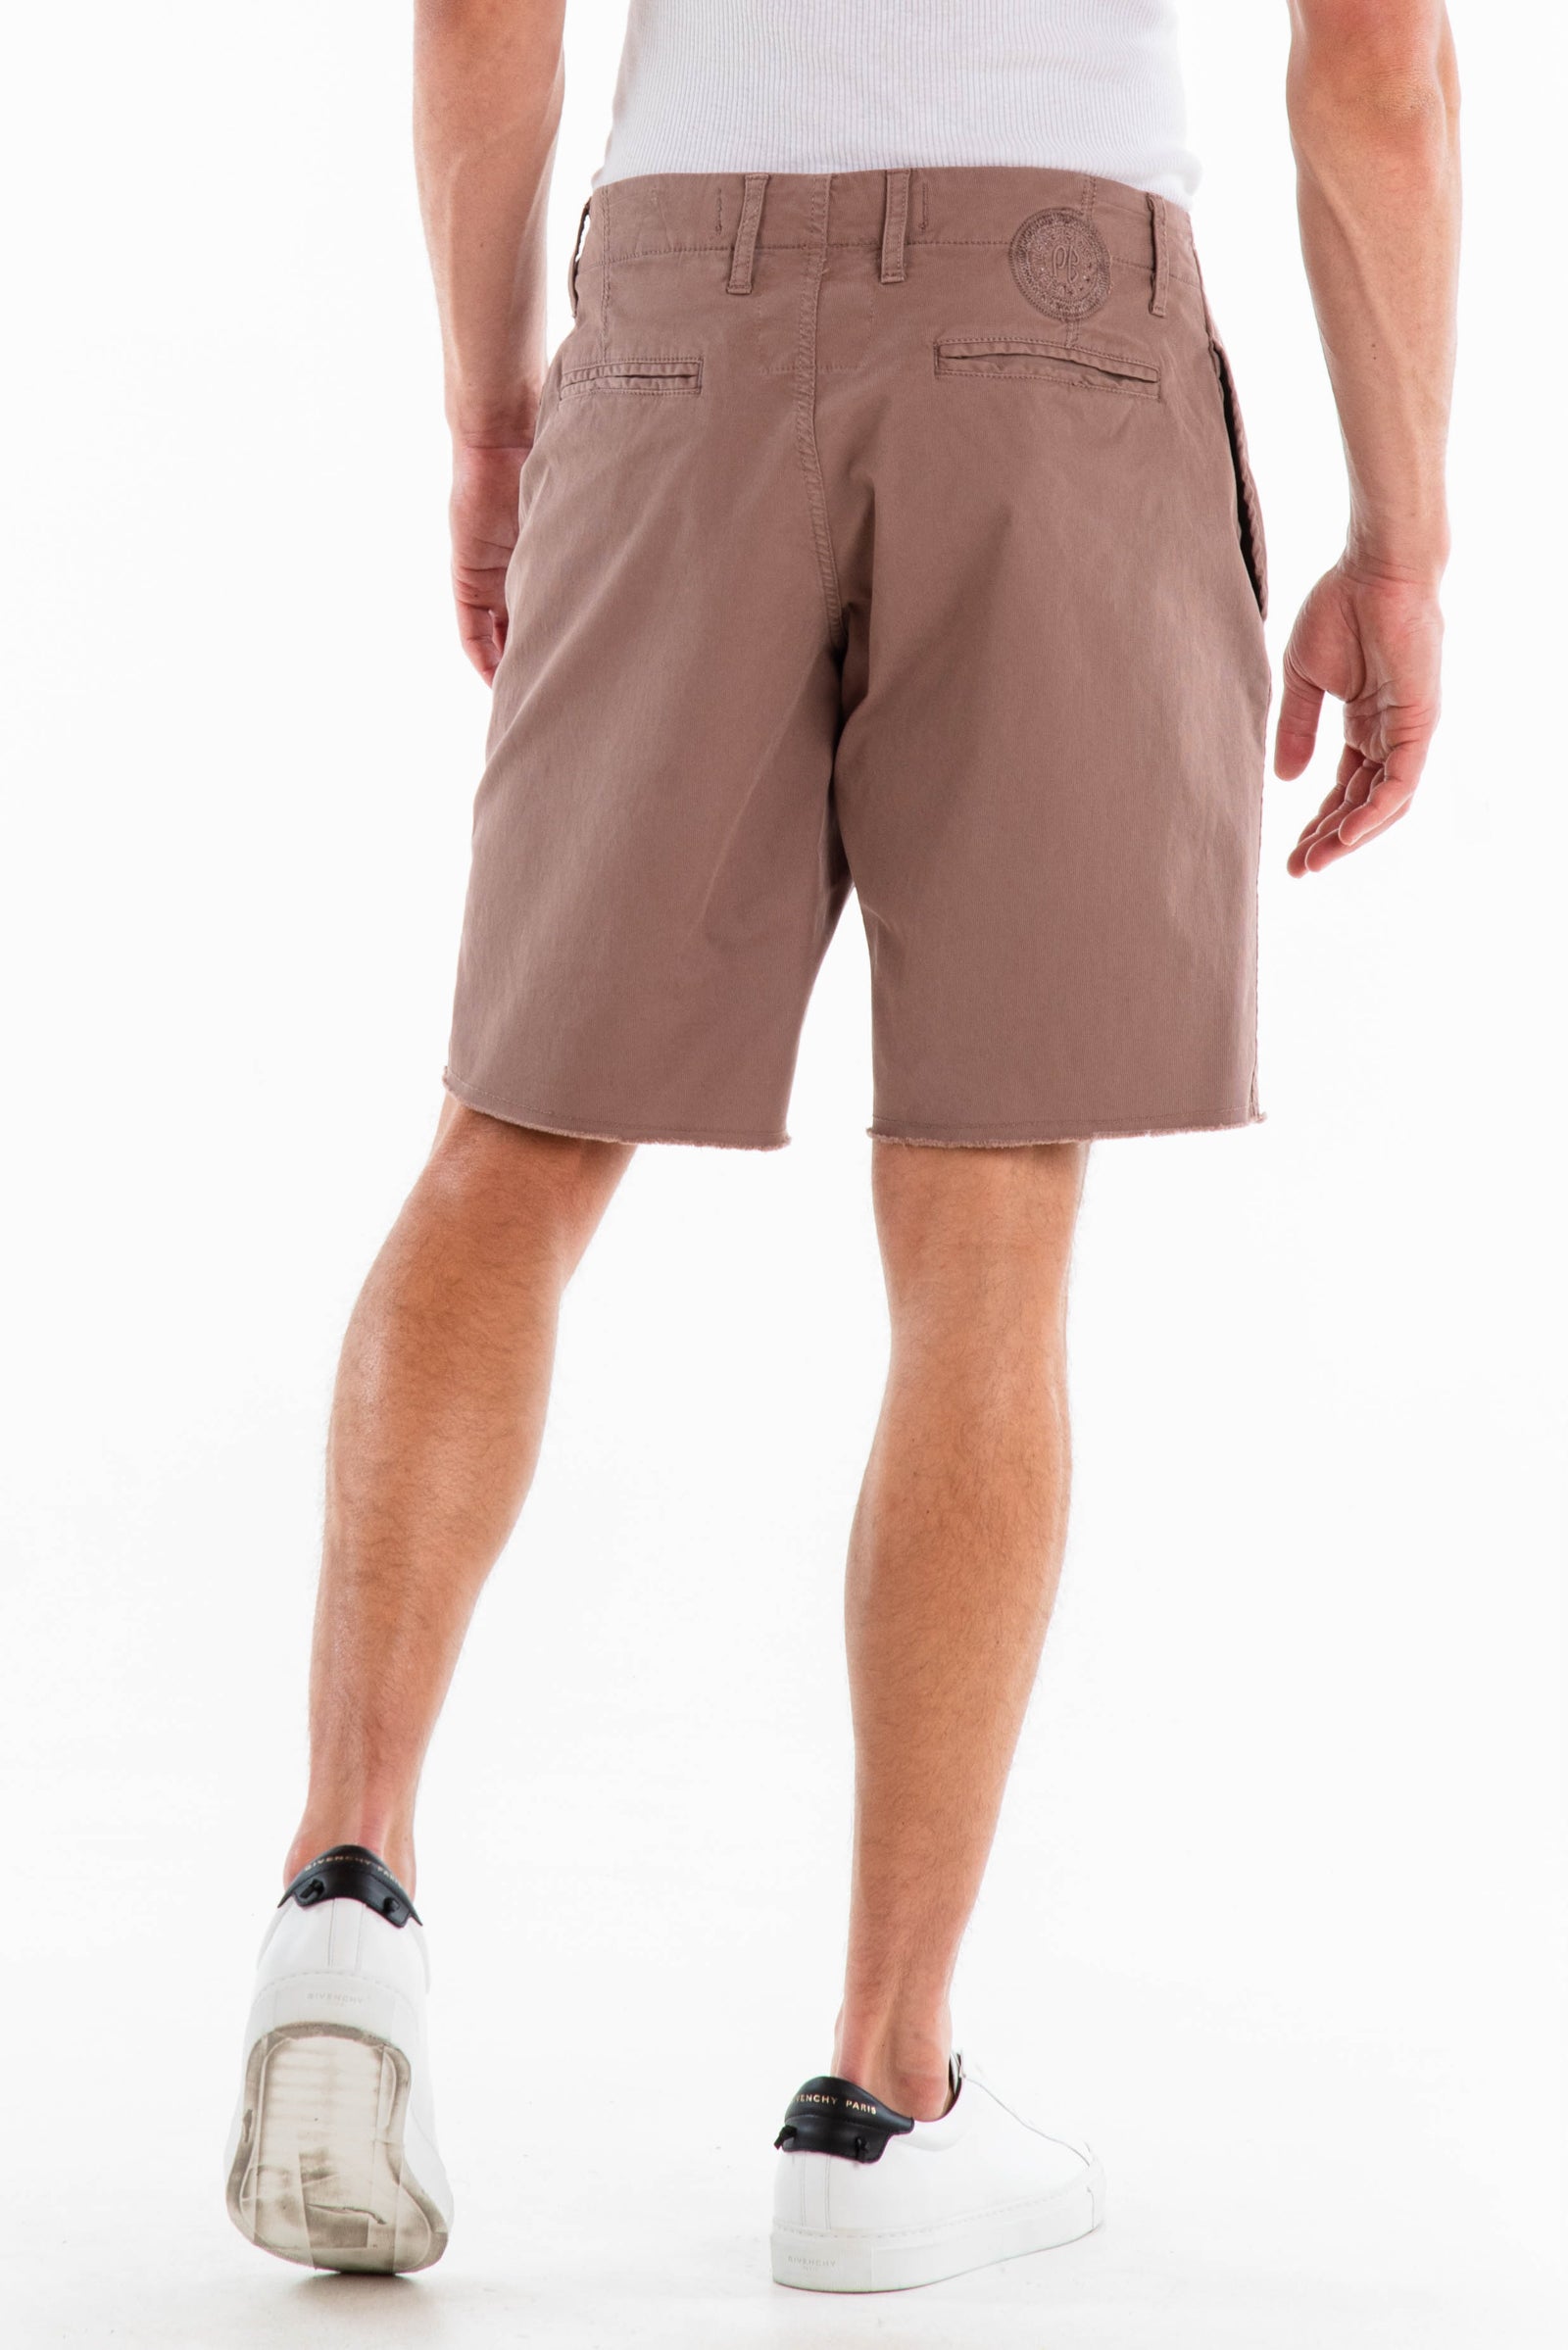 Original Paperbacks Rockland Chino Short in Chocolate on Model Cropped Back View